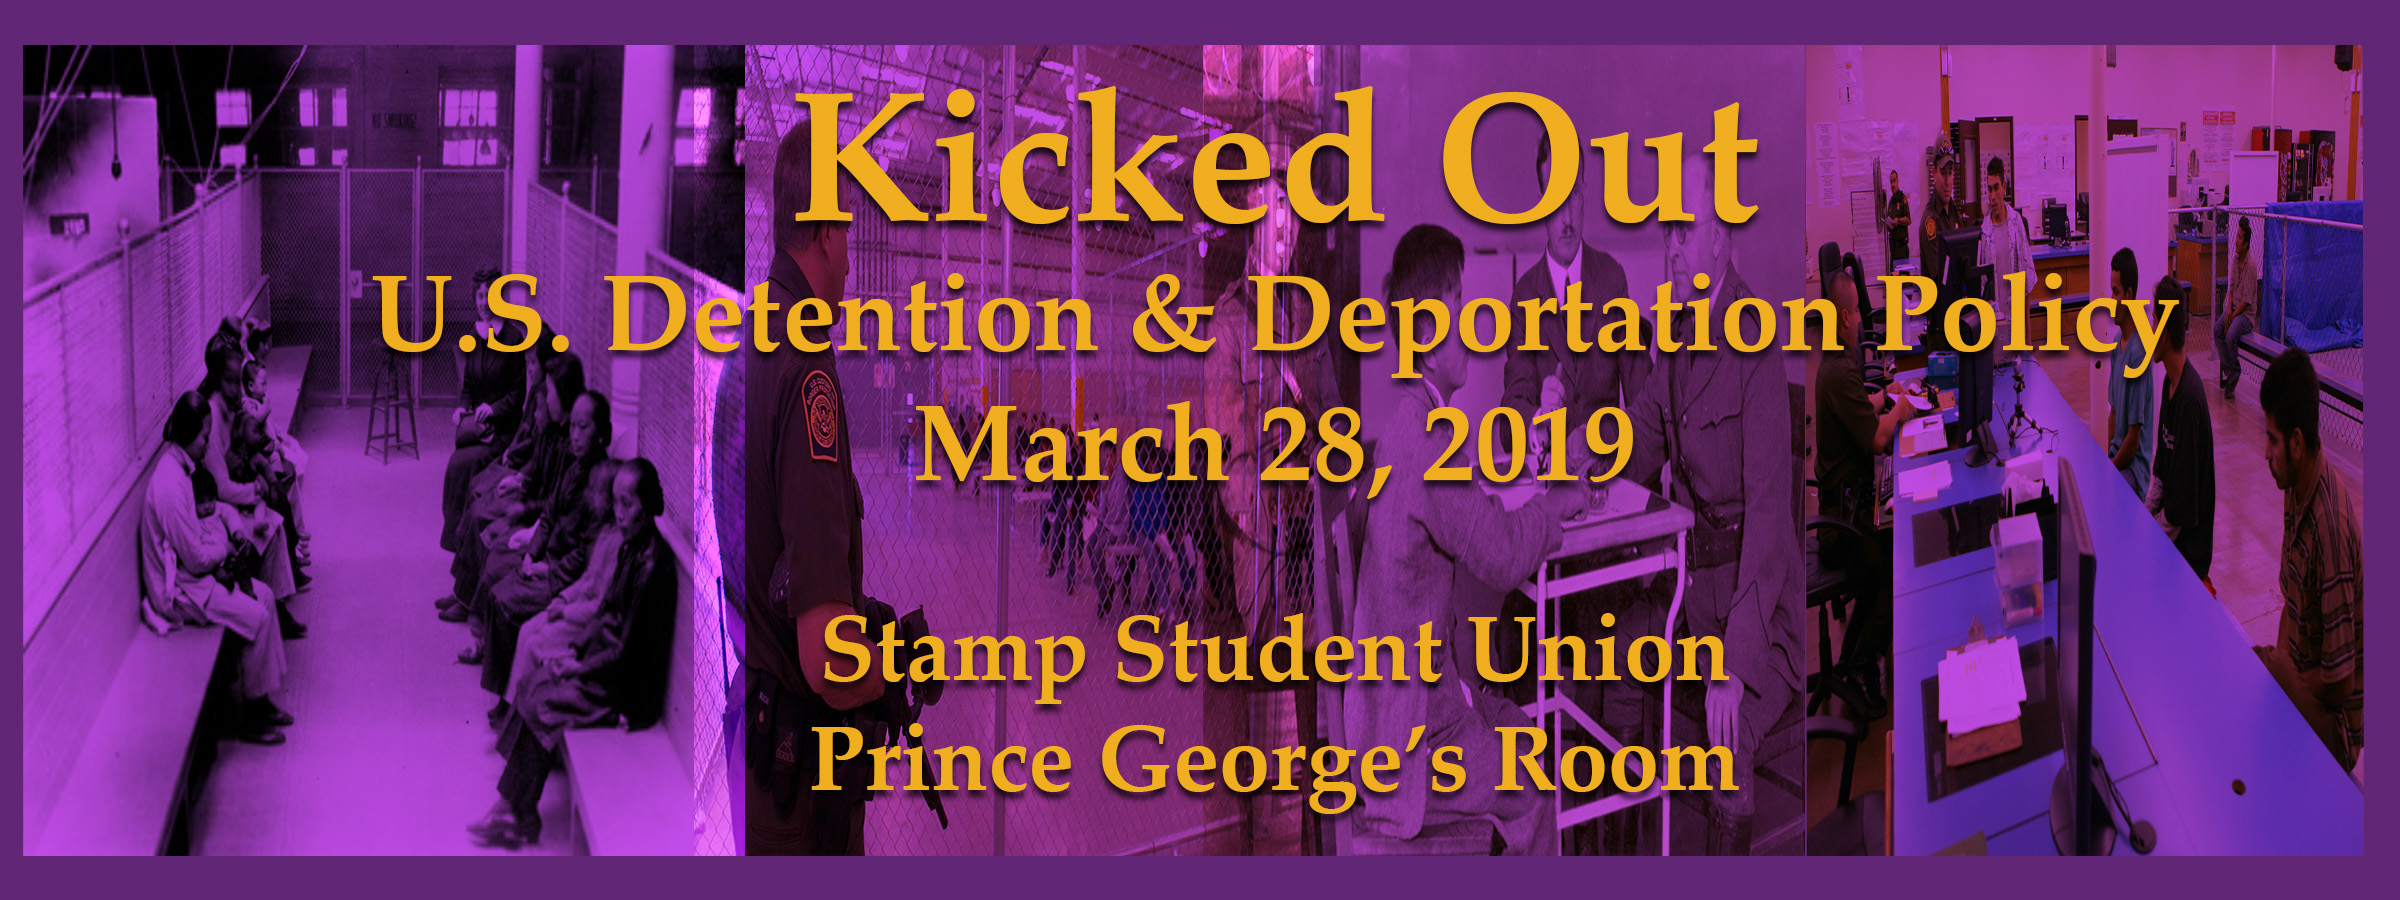 Image for event - CGMS Conference - Kicked Out: US Detention and Deportation Policy